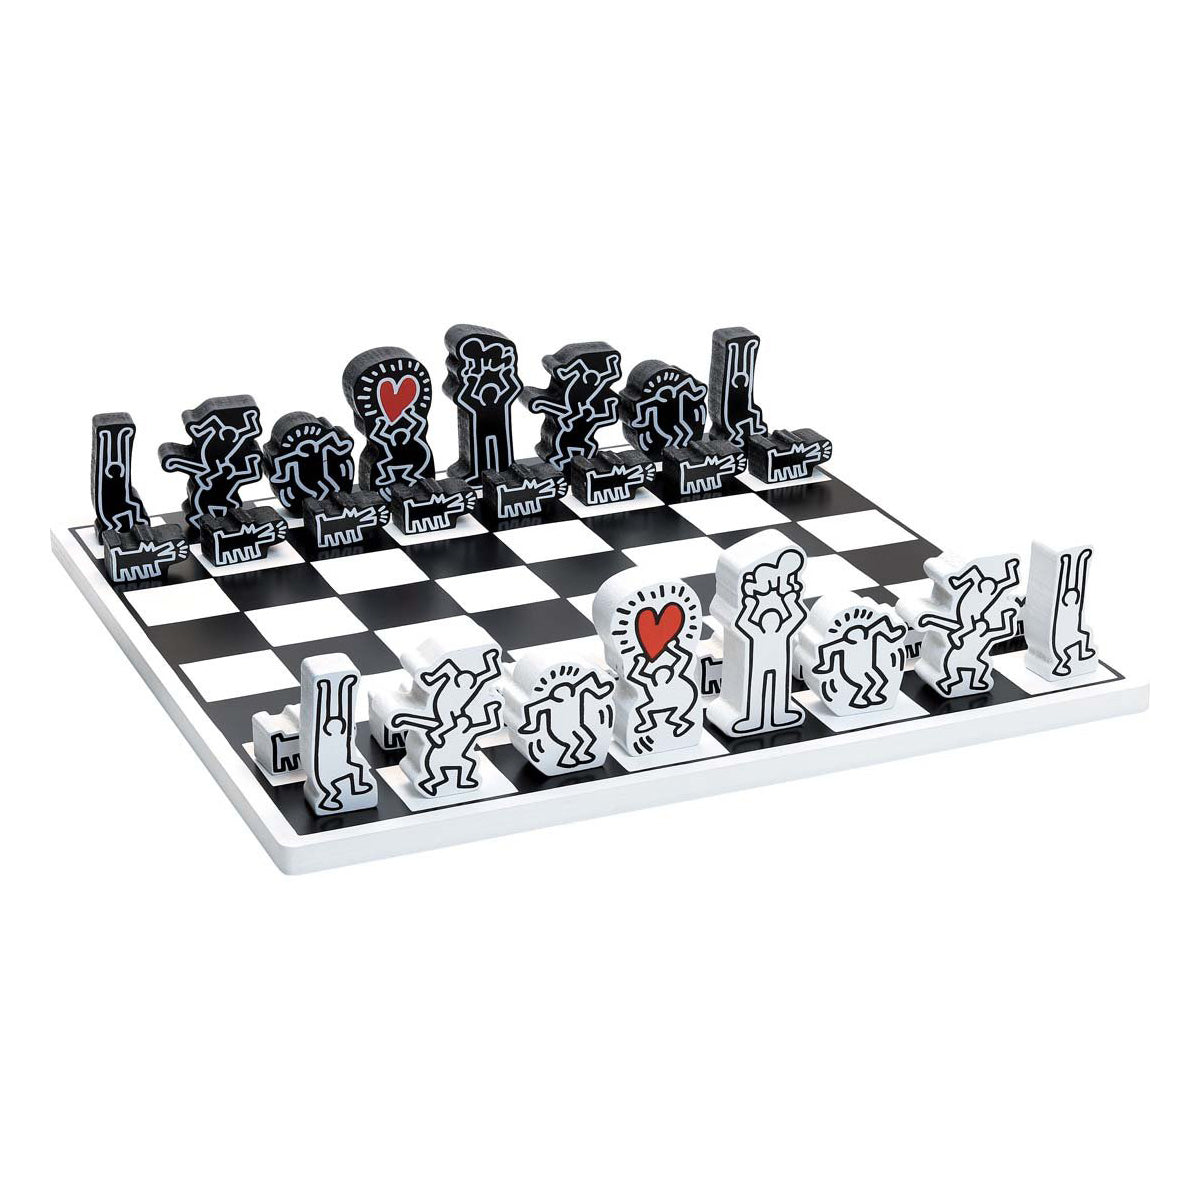 The Keith Haring Chess Set set up with its pieces.